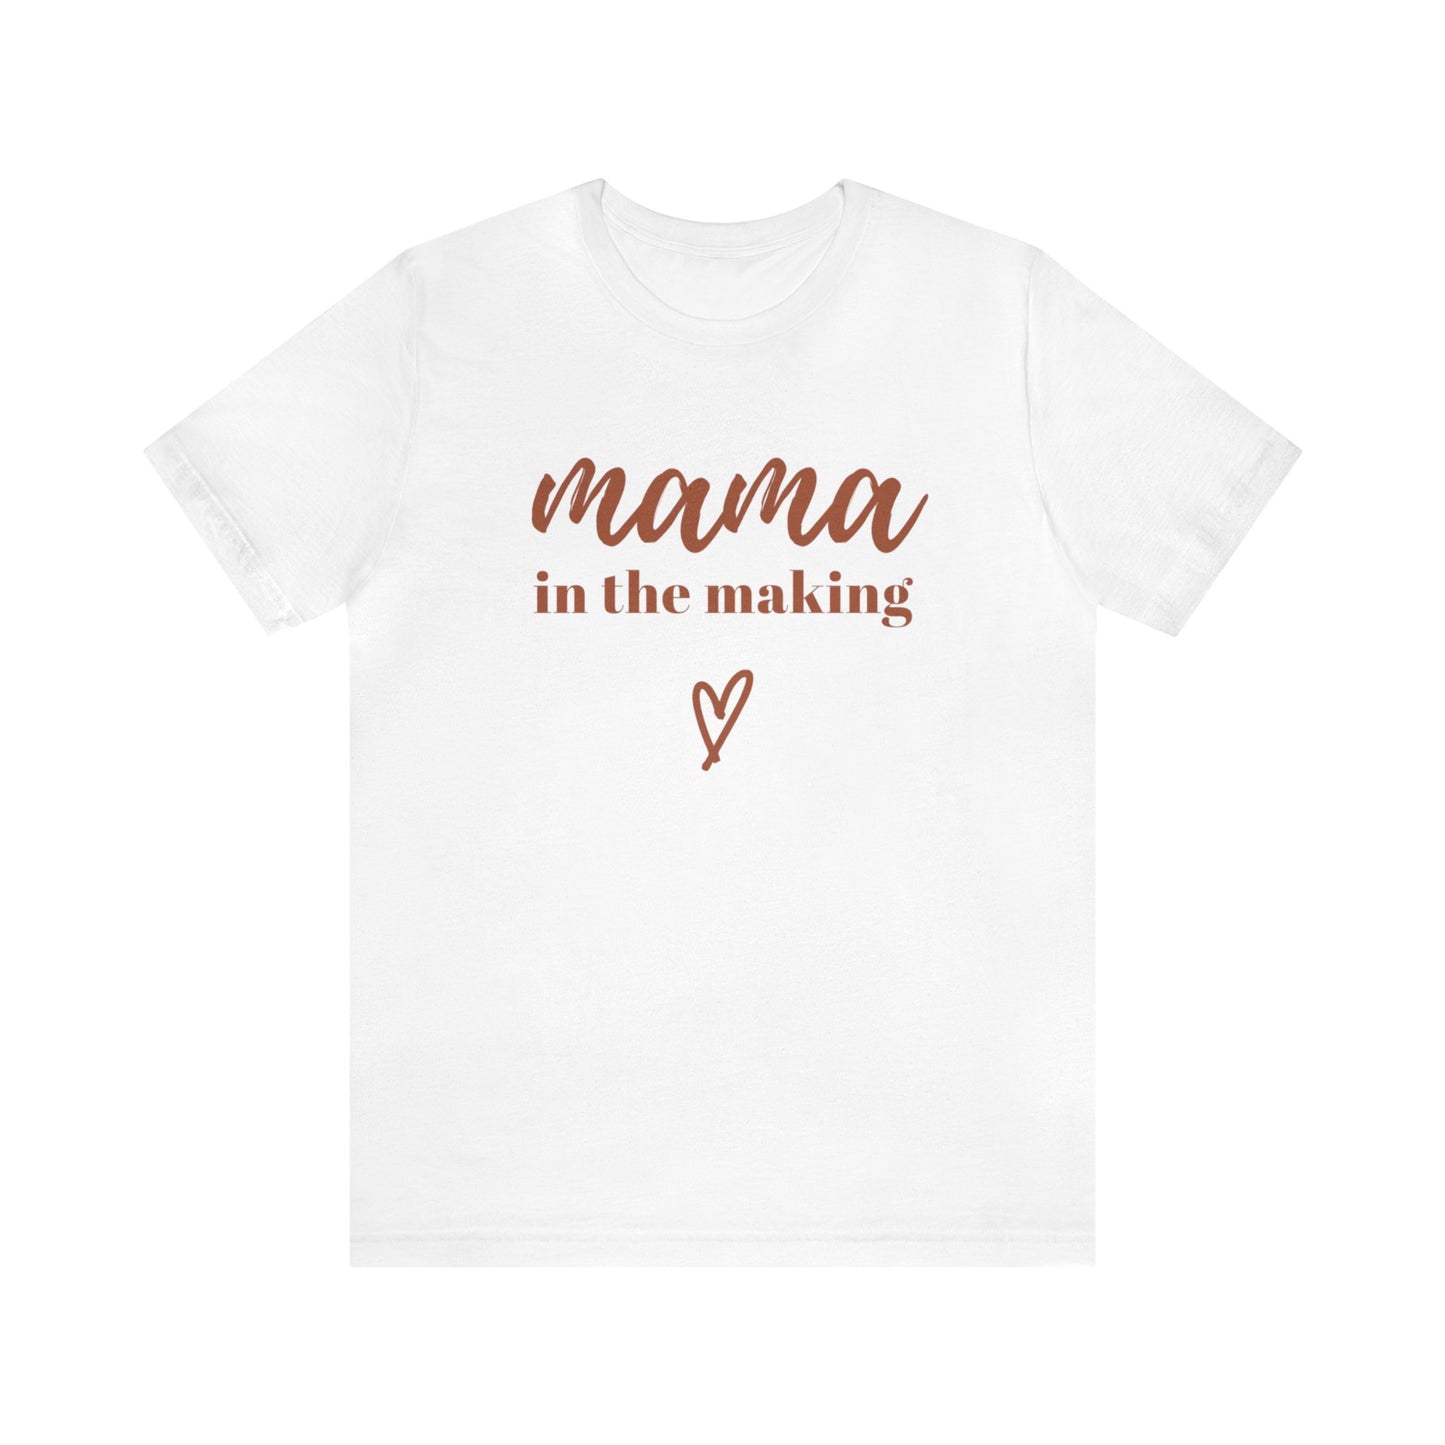 Mama In The Making - T Shirt Gift For Pregnant Women, Soon To Be Mothers